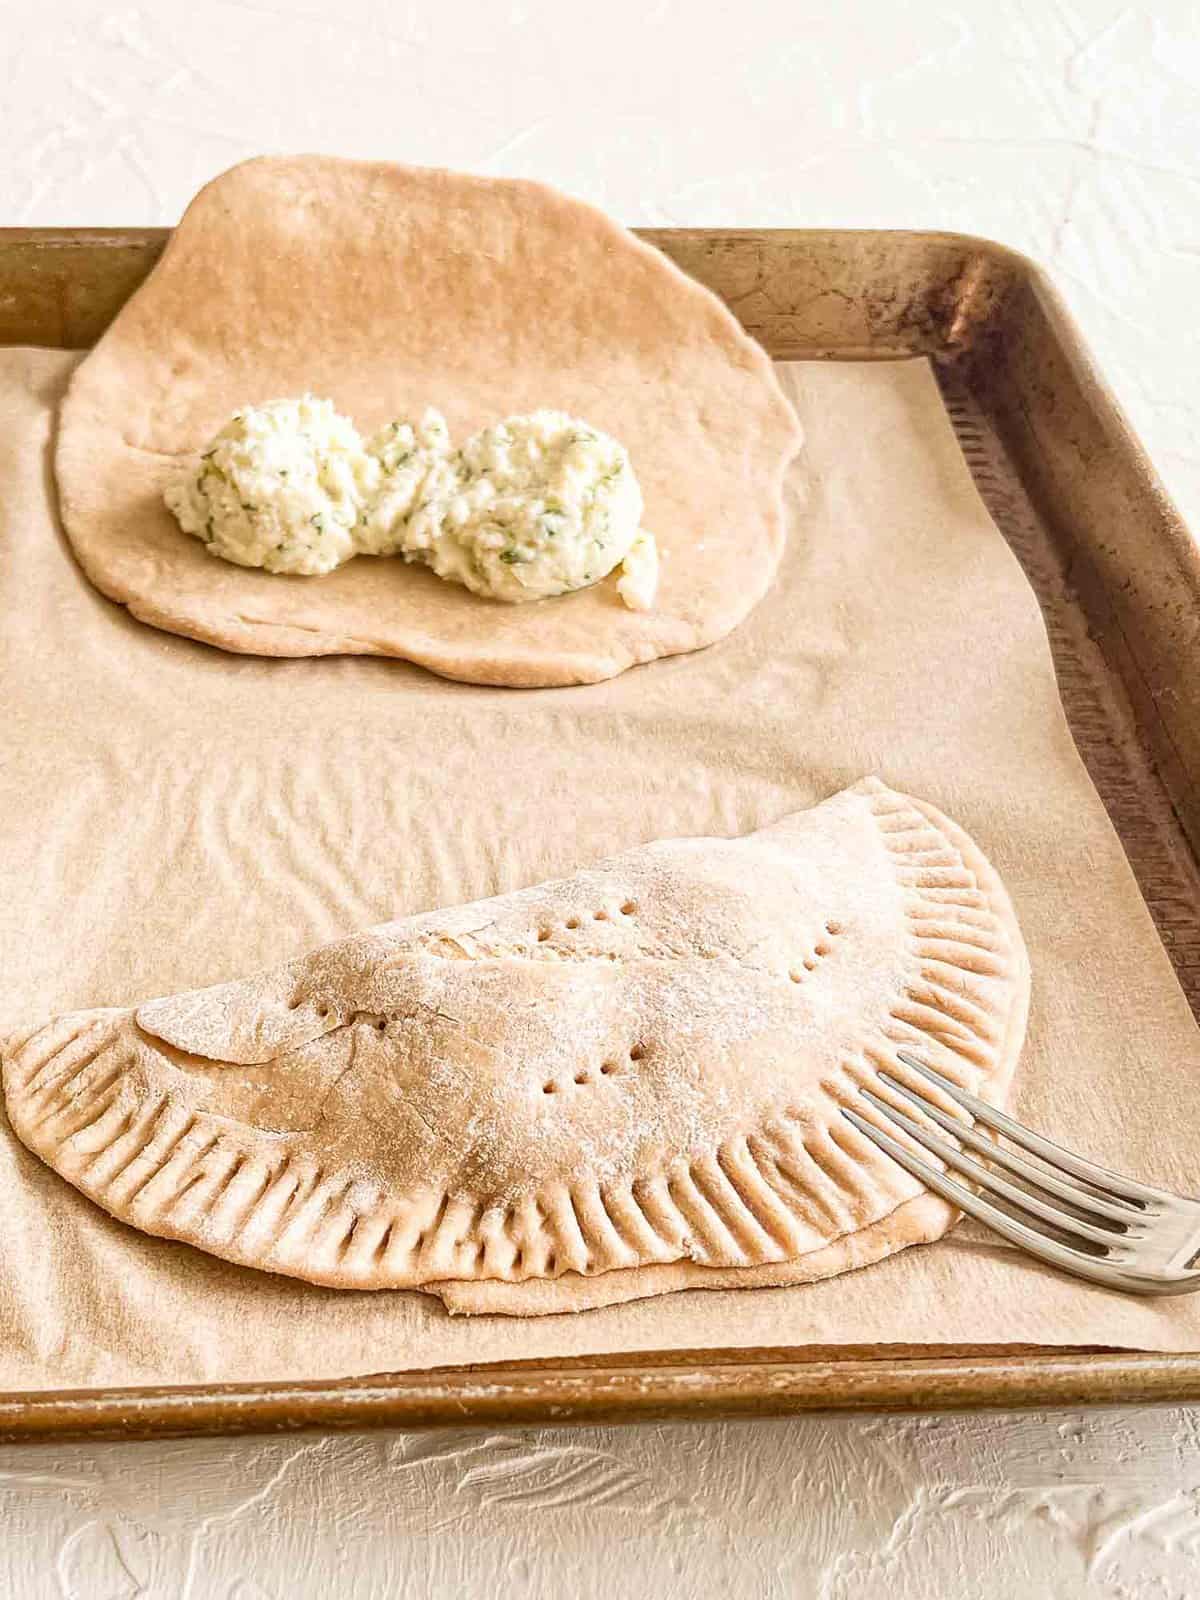 Calzone Dough on a baking sheet with scoops of the cheesy filling on them. One has been folded over and fork marks are being made along the edges to seal it.